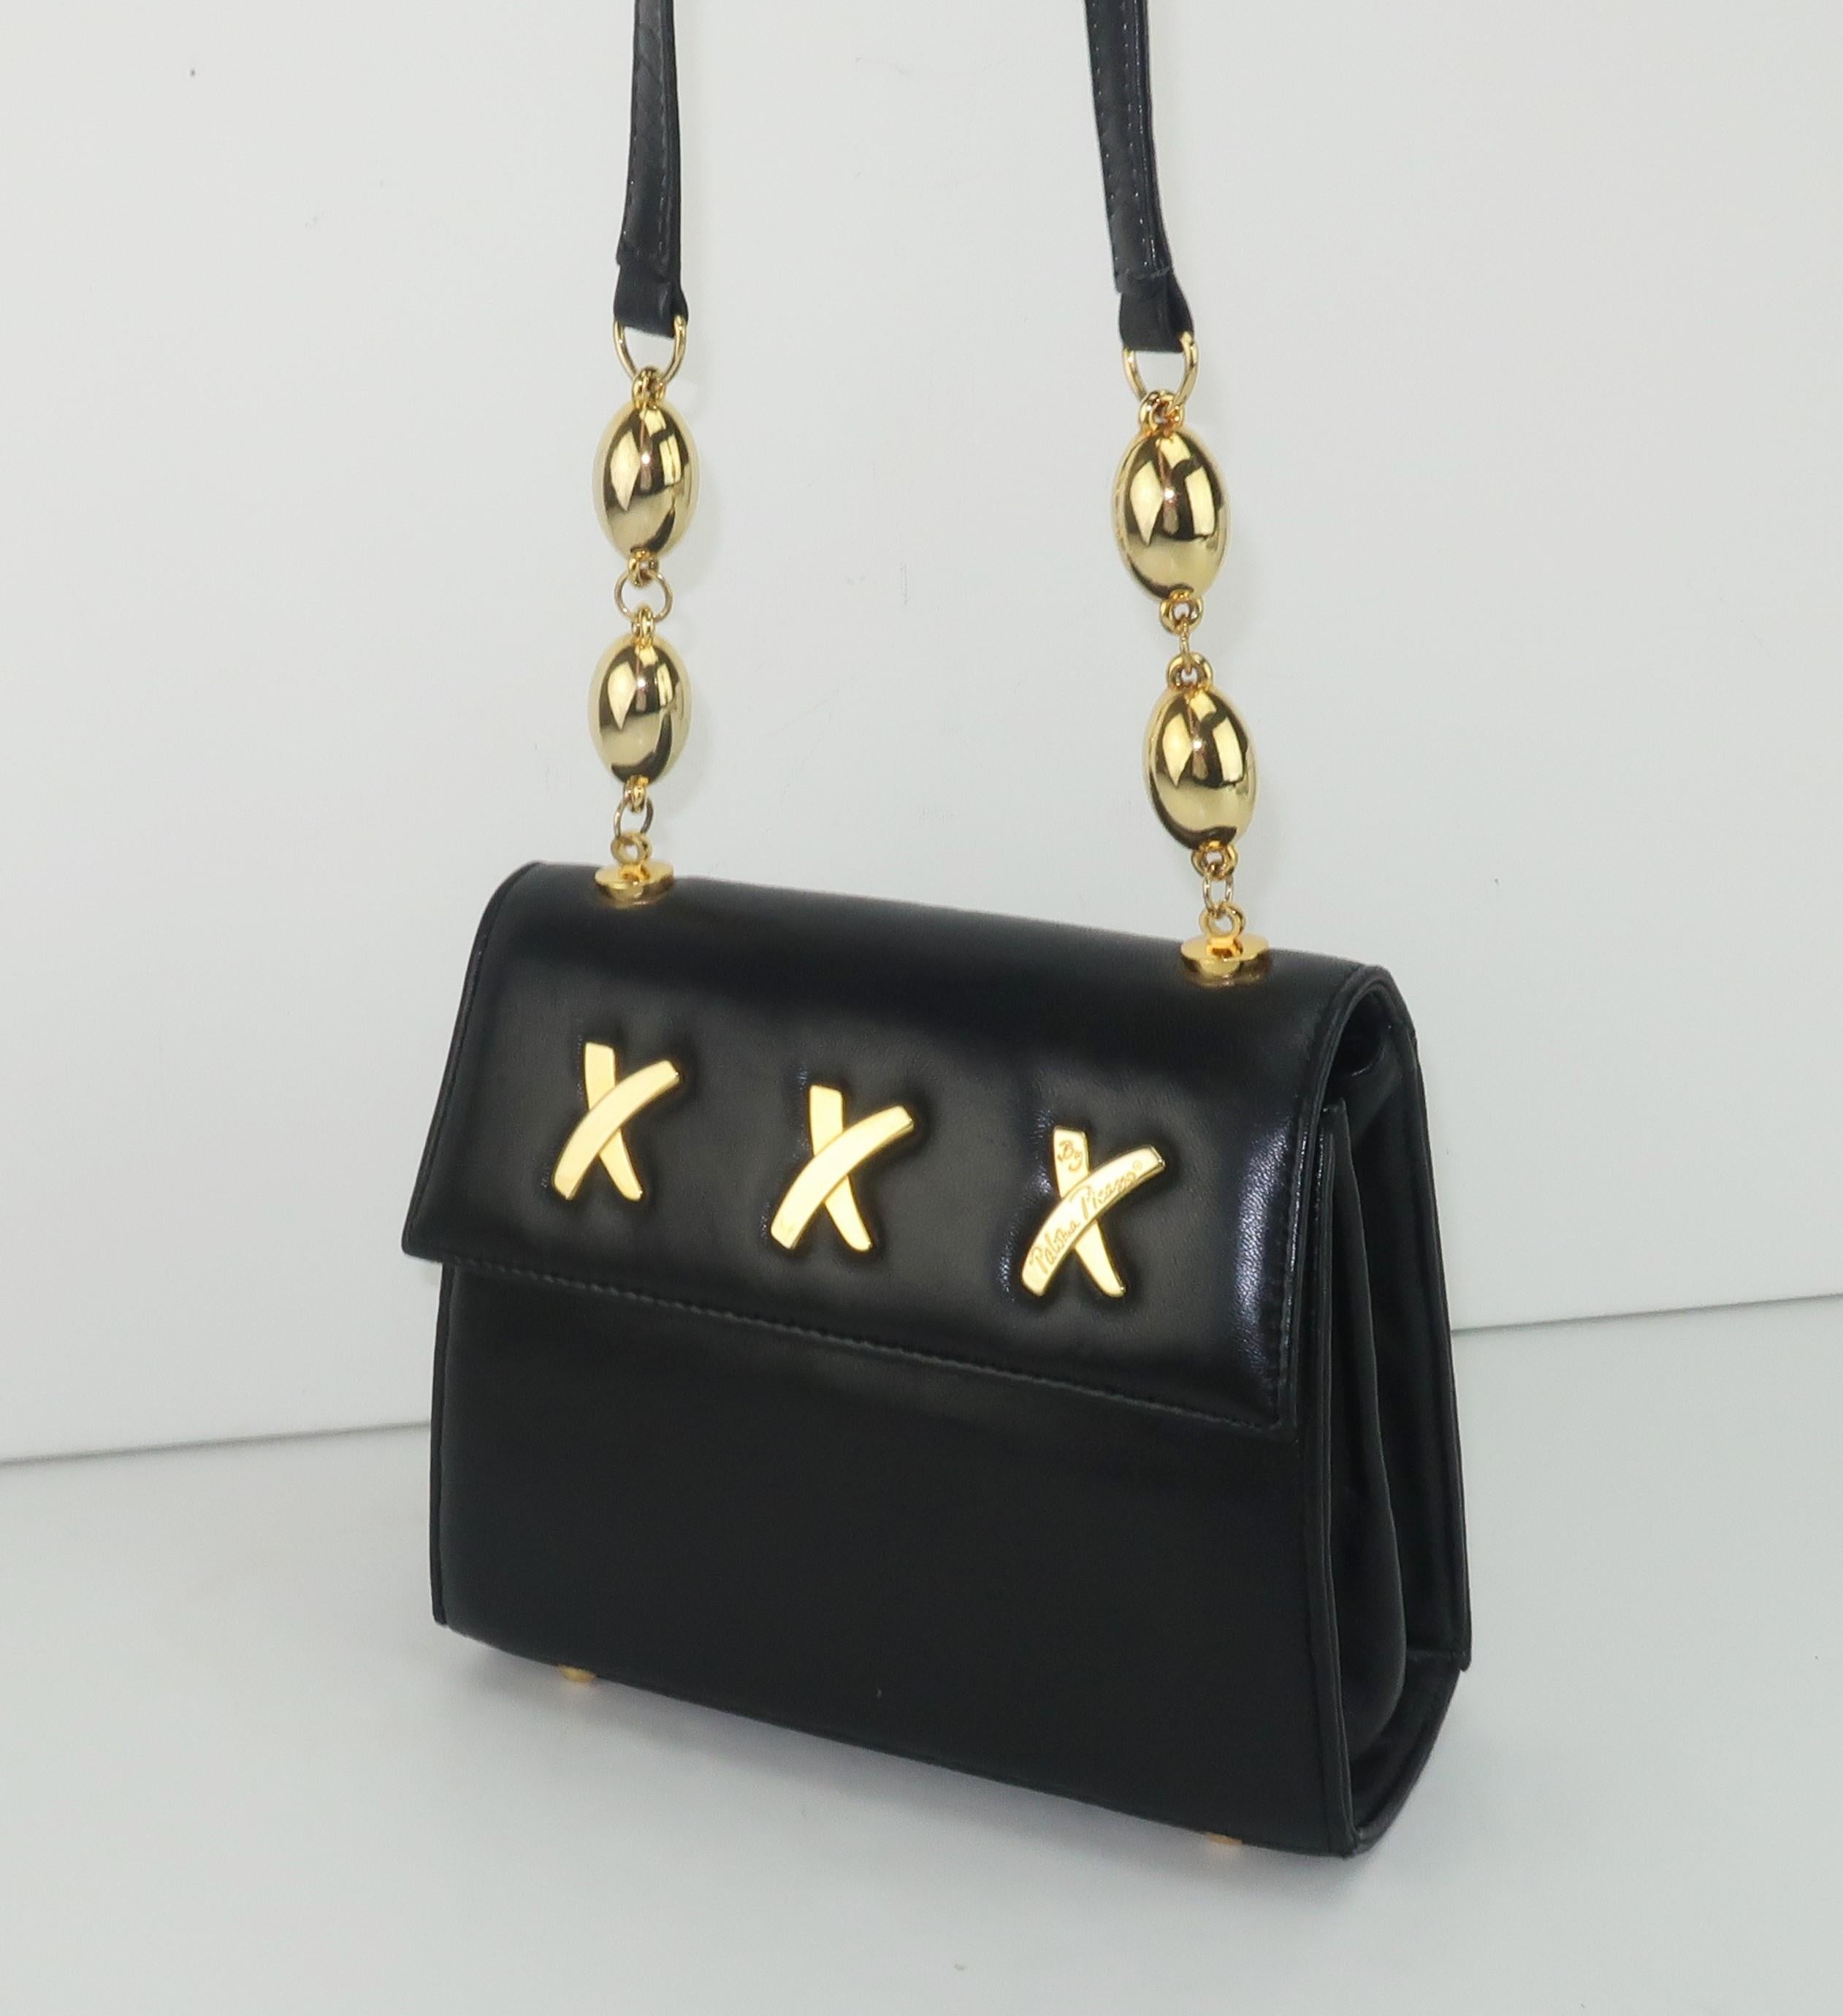 A classic Paloma Picasso shoulder strap handbag in a supple black leather with the iconic 'X' logo in gold tone metal ... triple kisses from Ms. Picasso!  The long shoulder strap is accented by gold tone spheres and one 'X' on the exterior is signed